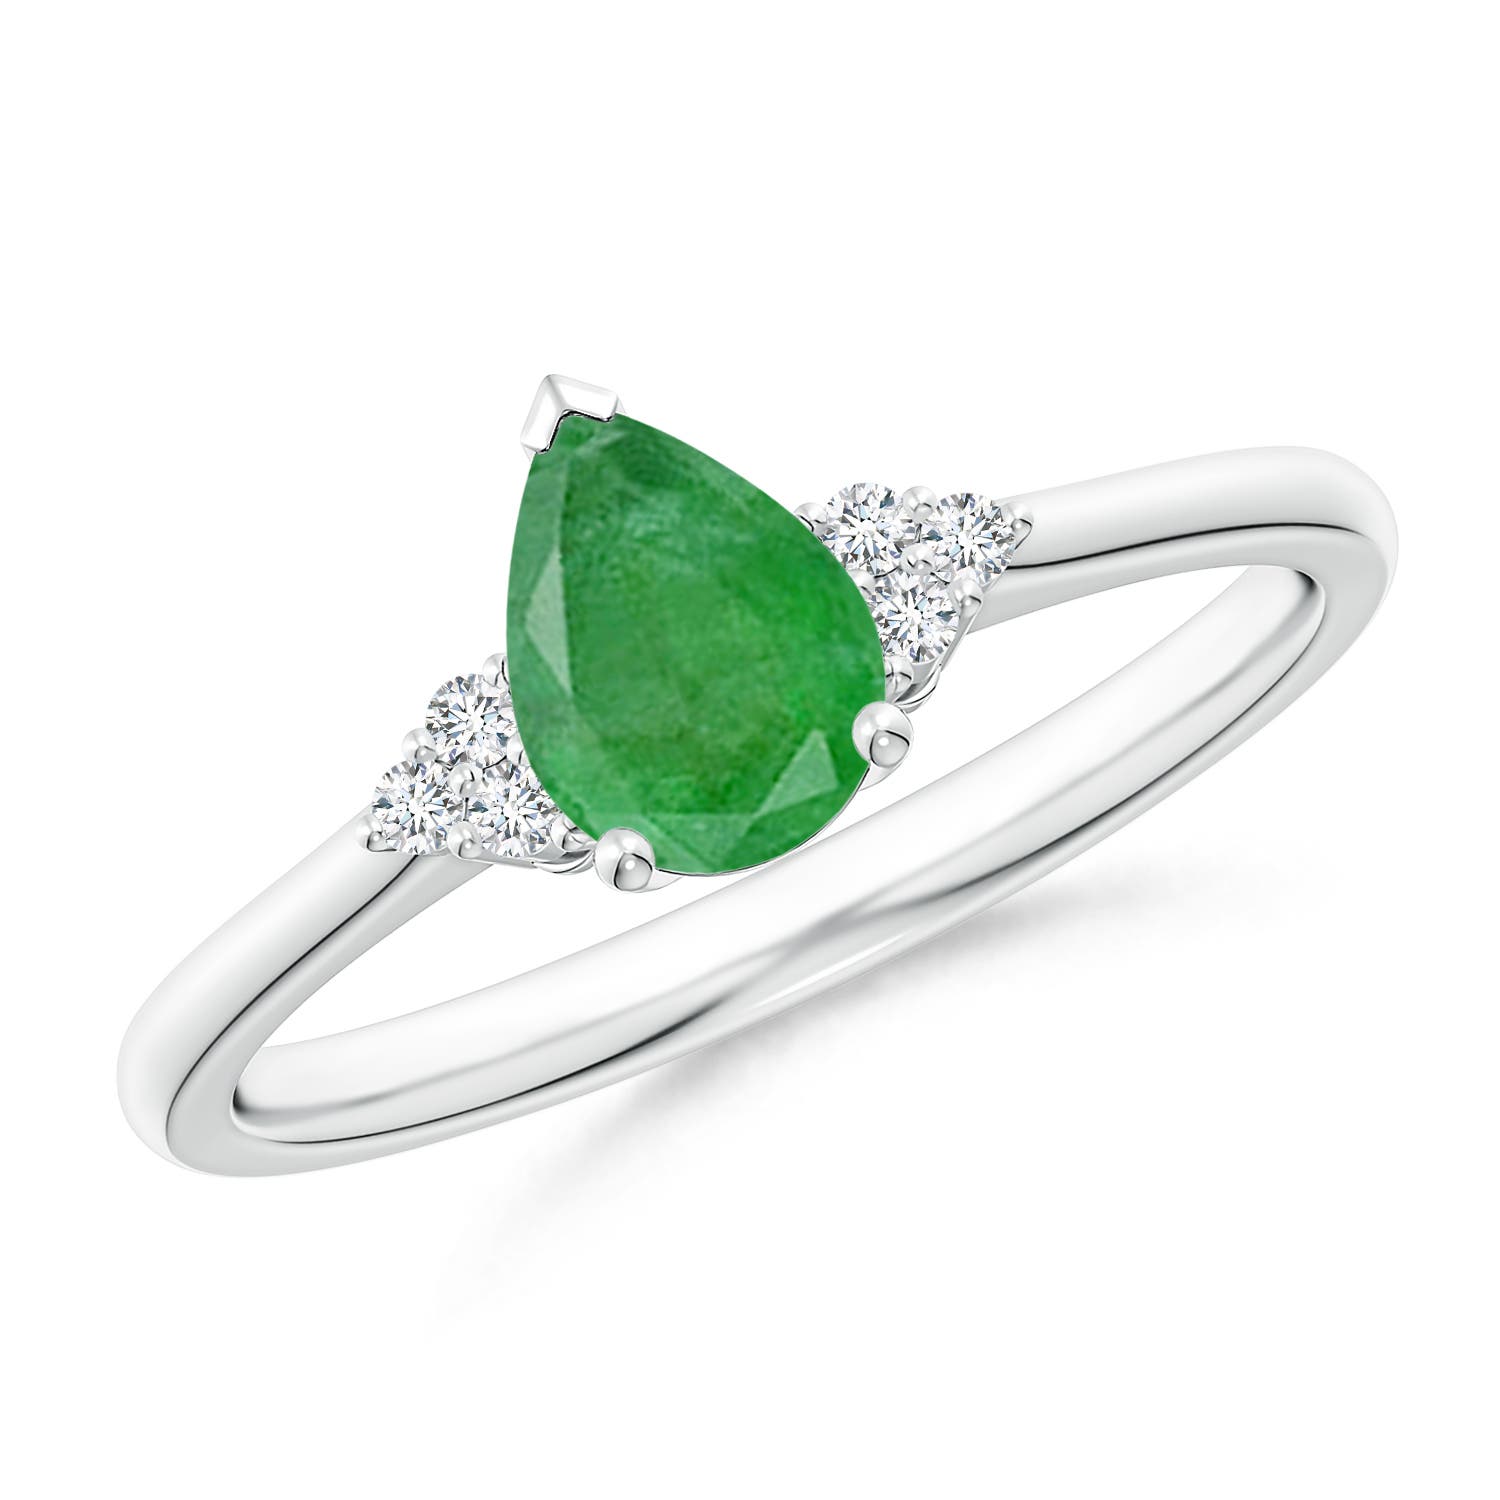 A - Emerald / 0.66 CT / 14 KT White Gold